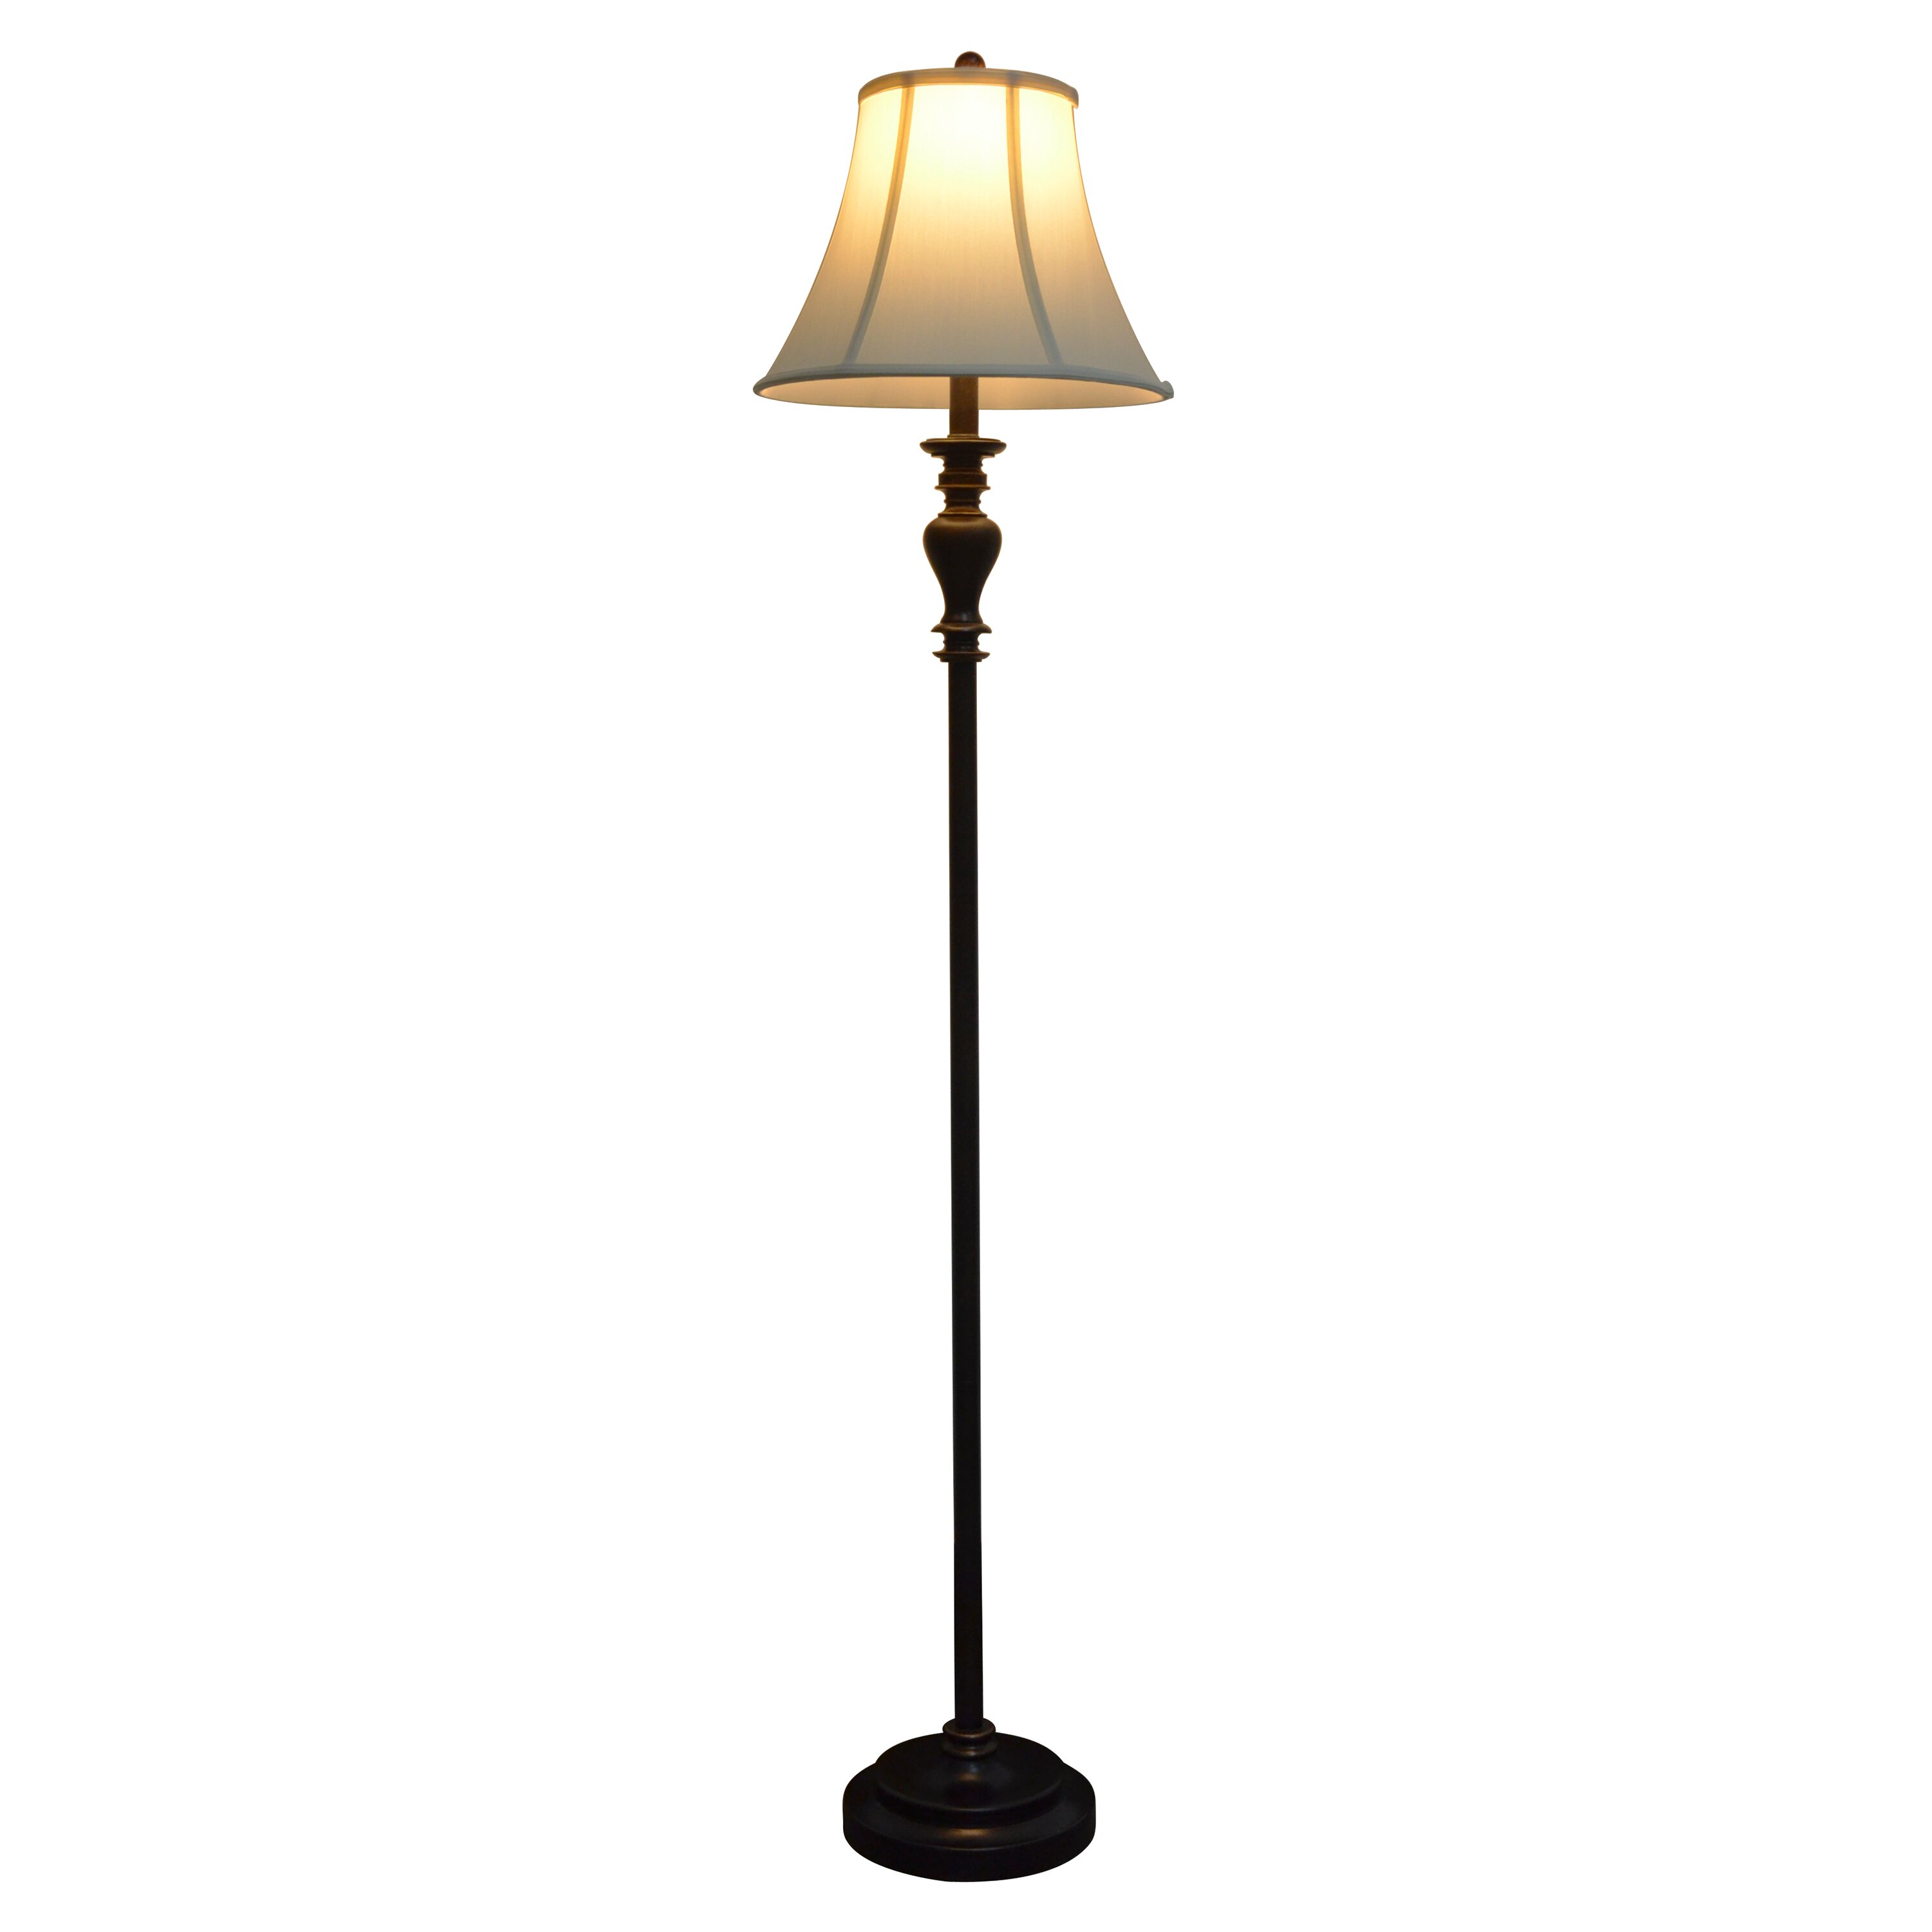 Decor Therapy 61.5" Floor Lamp & Reviews